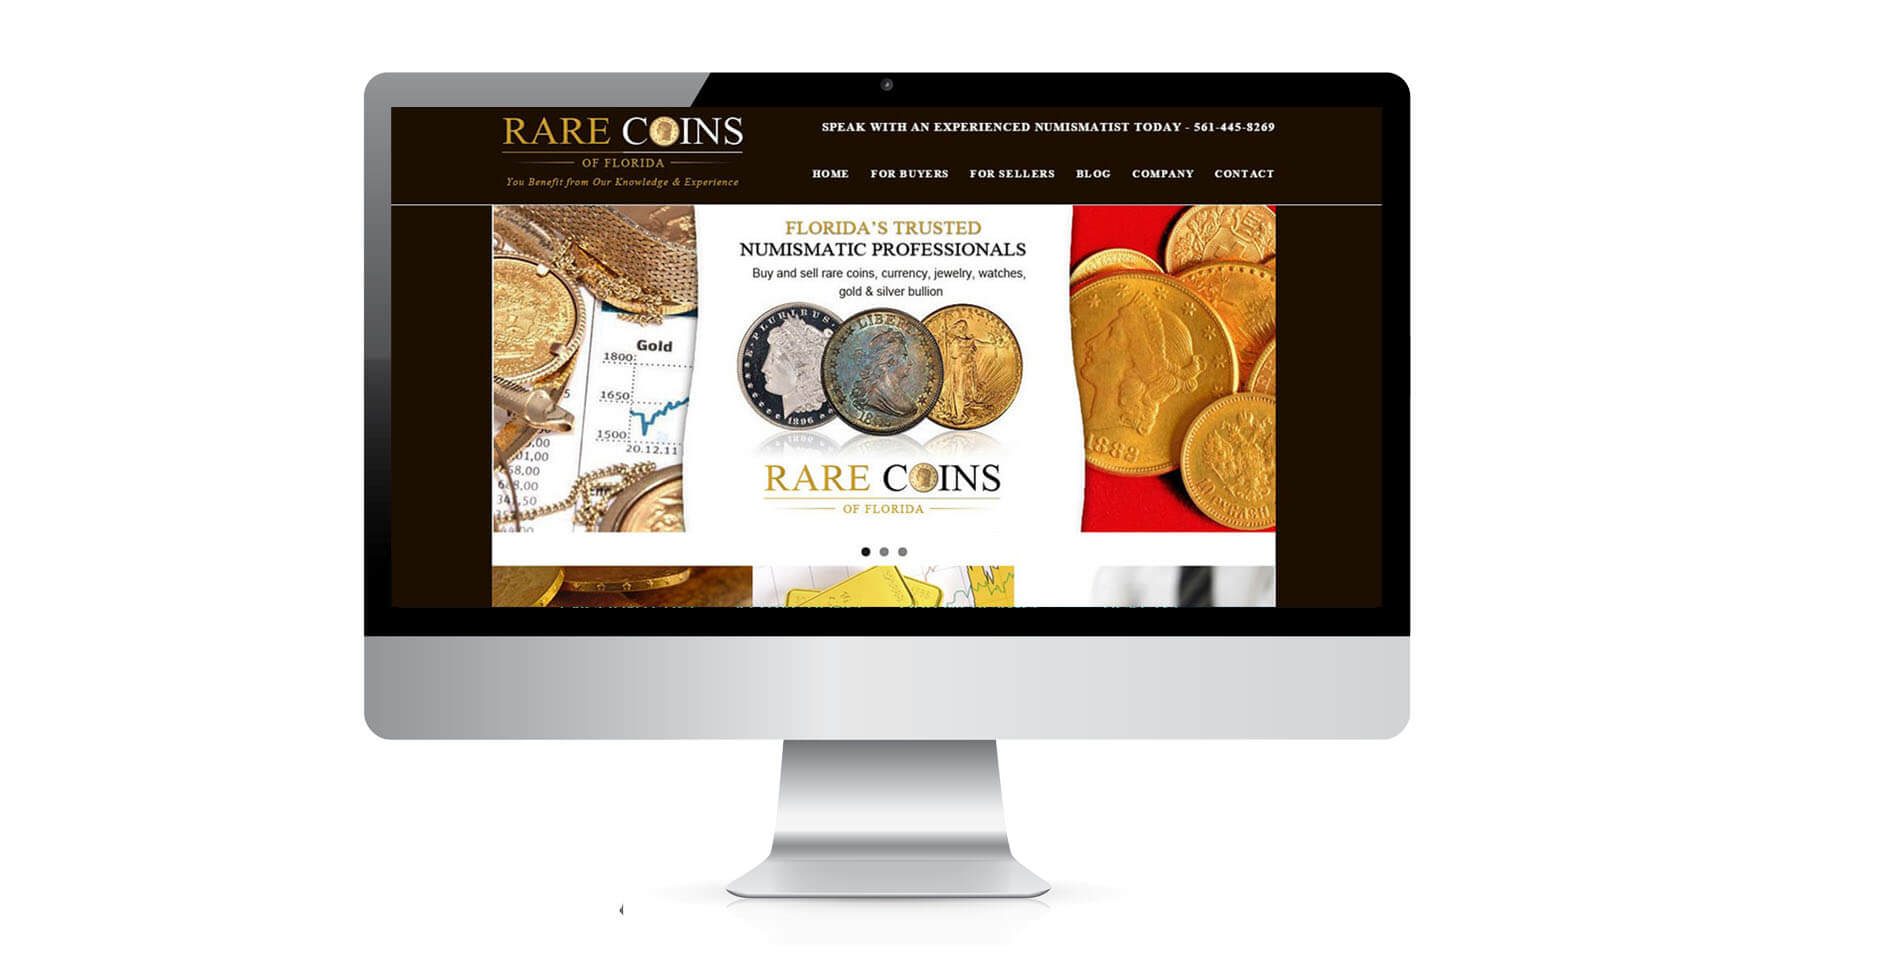 An image of the Rare Coins of Florida website on a mac computer mockup.